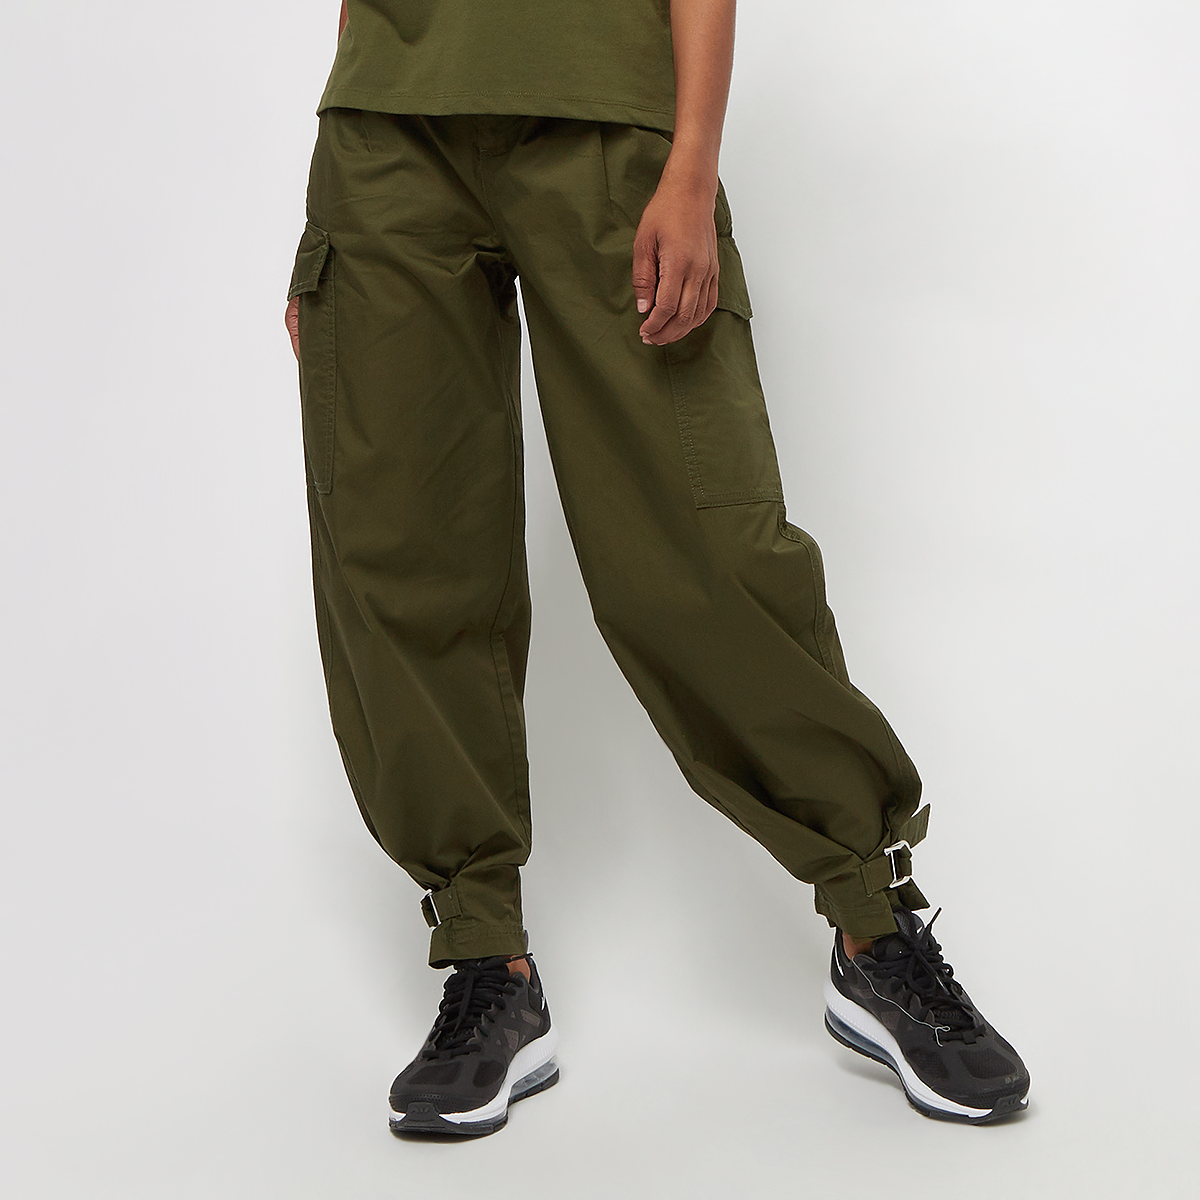 Productafbeelding: TJW HR Belted Pant